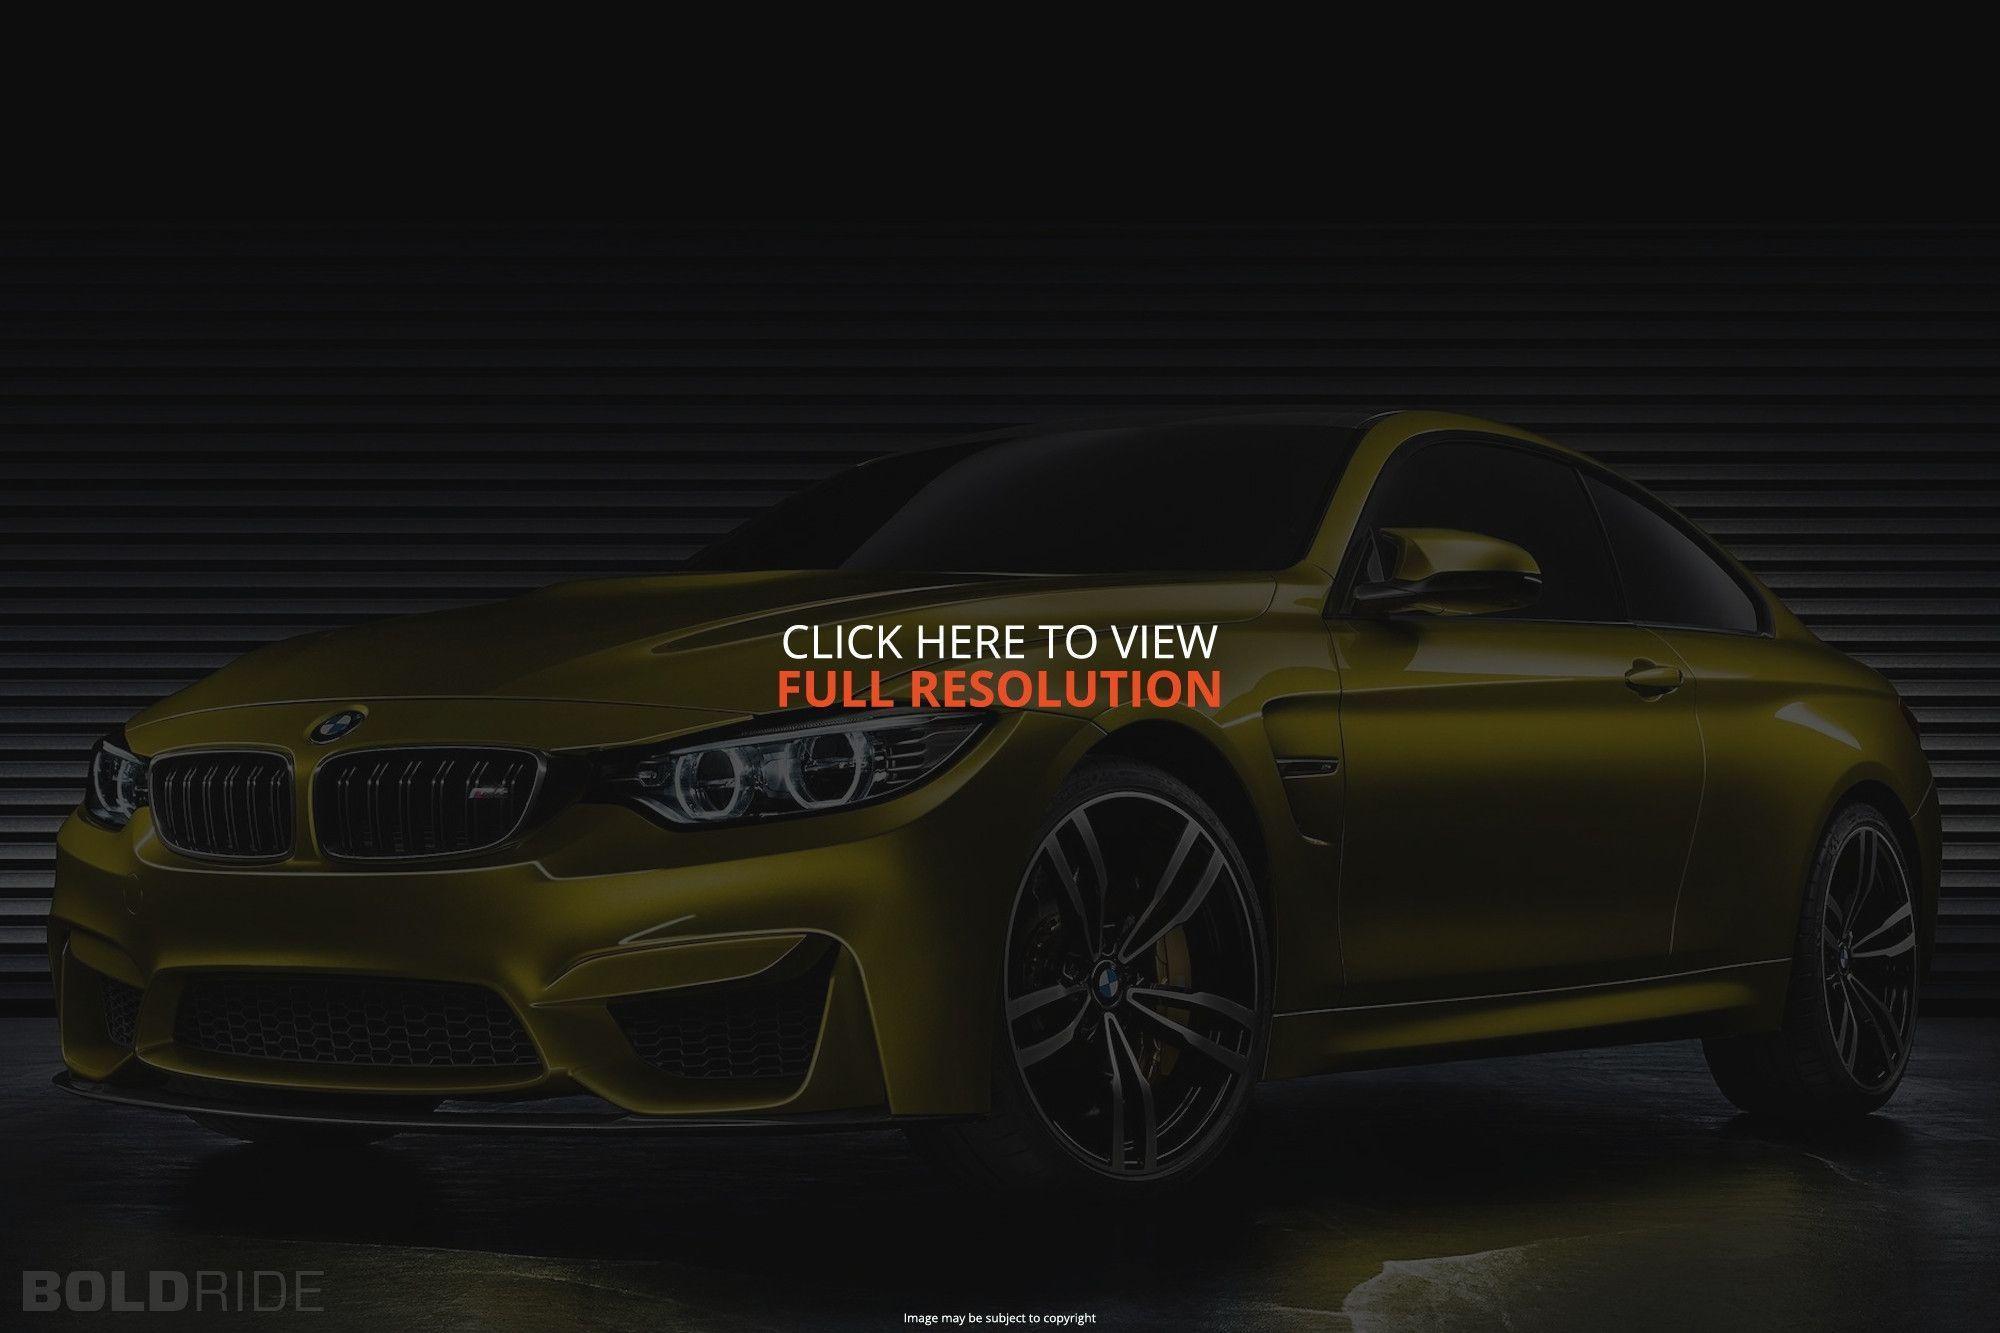 BMW M4 Concept Image. Picture and Videos